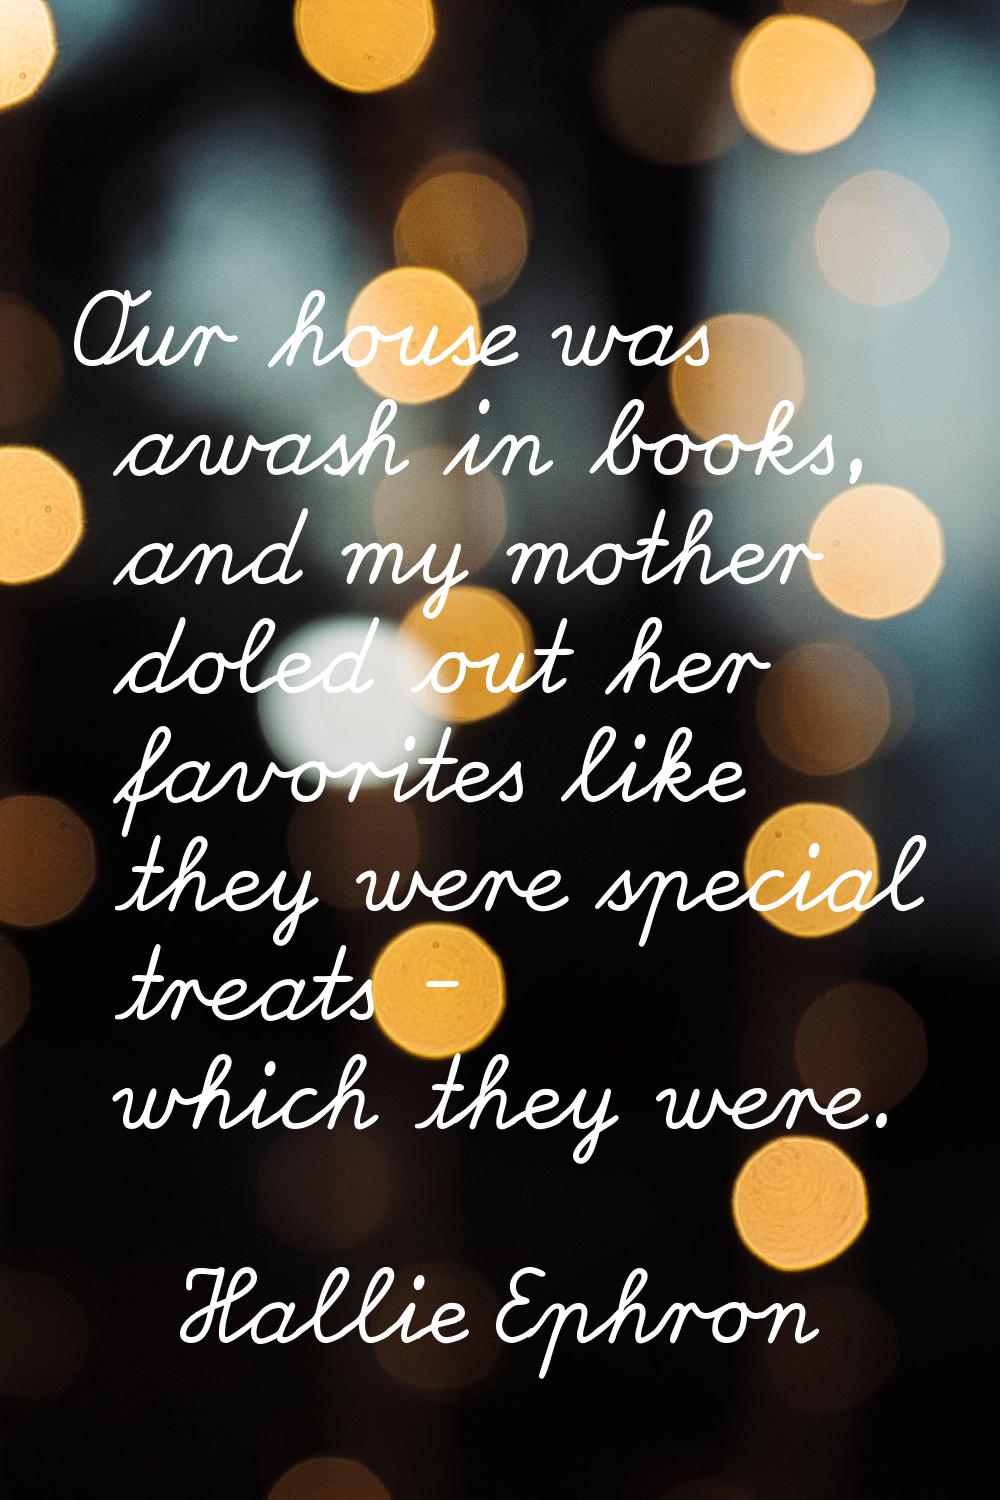 Our house was awash in books, and my mother doled out her favorites like they were special treats -